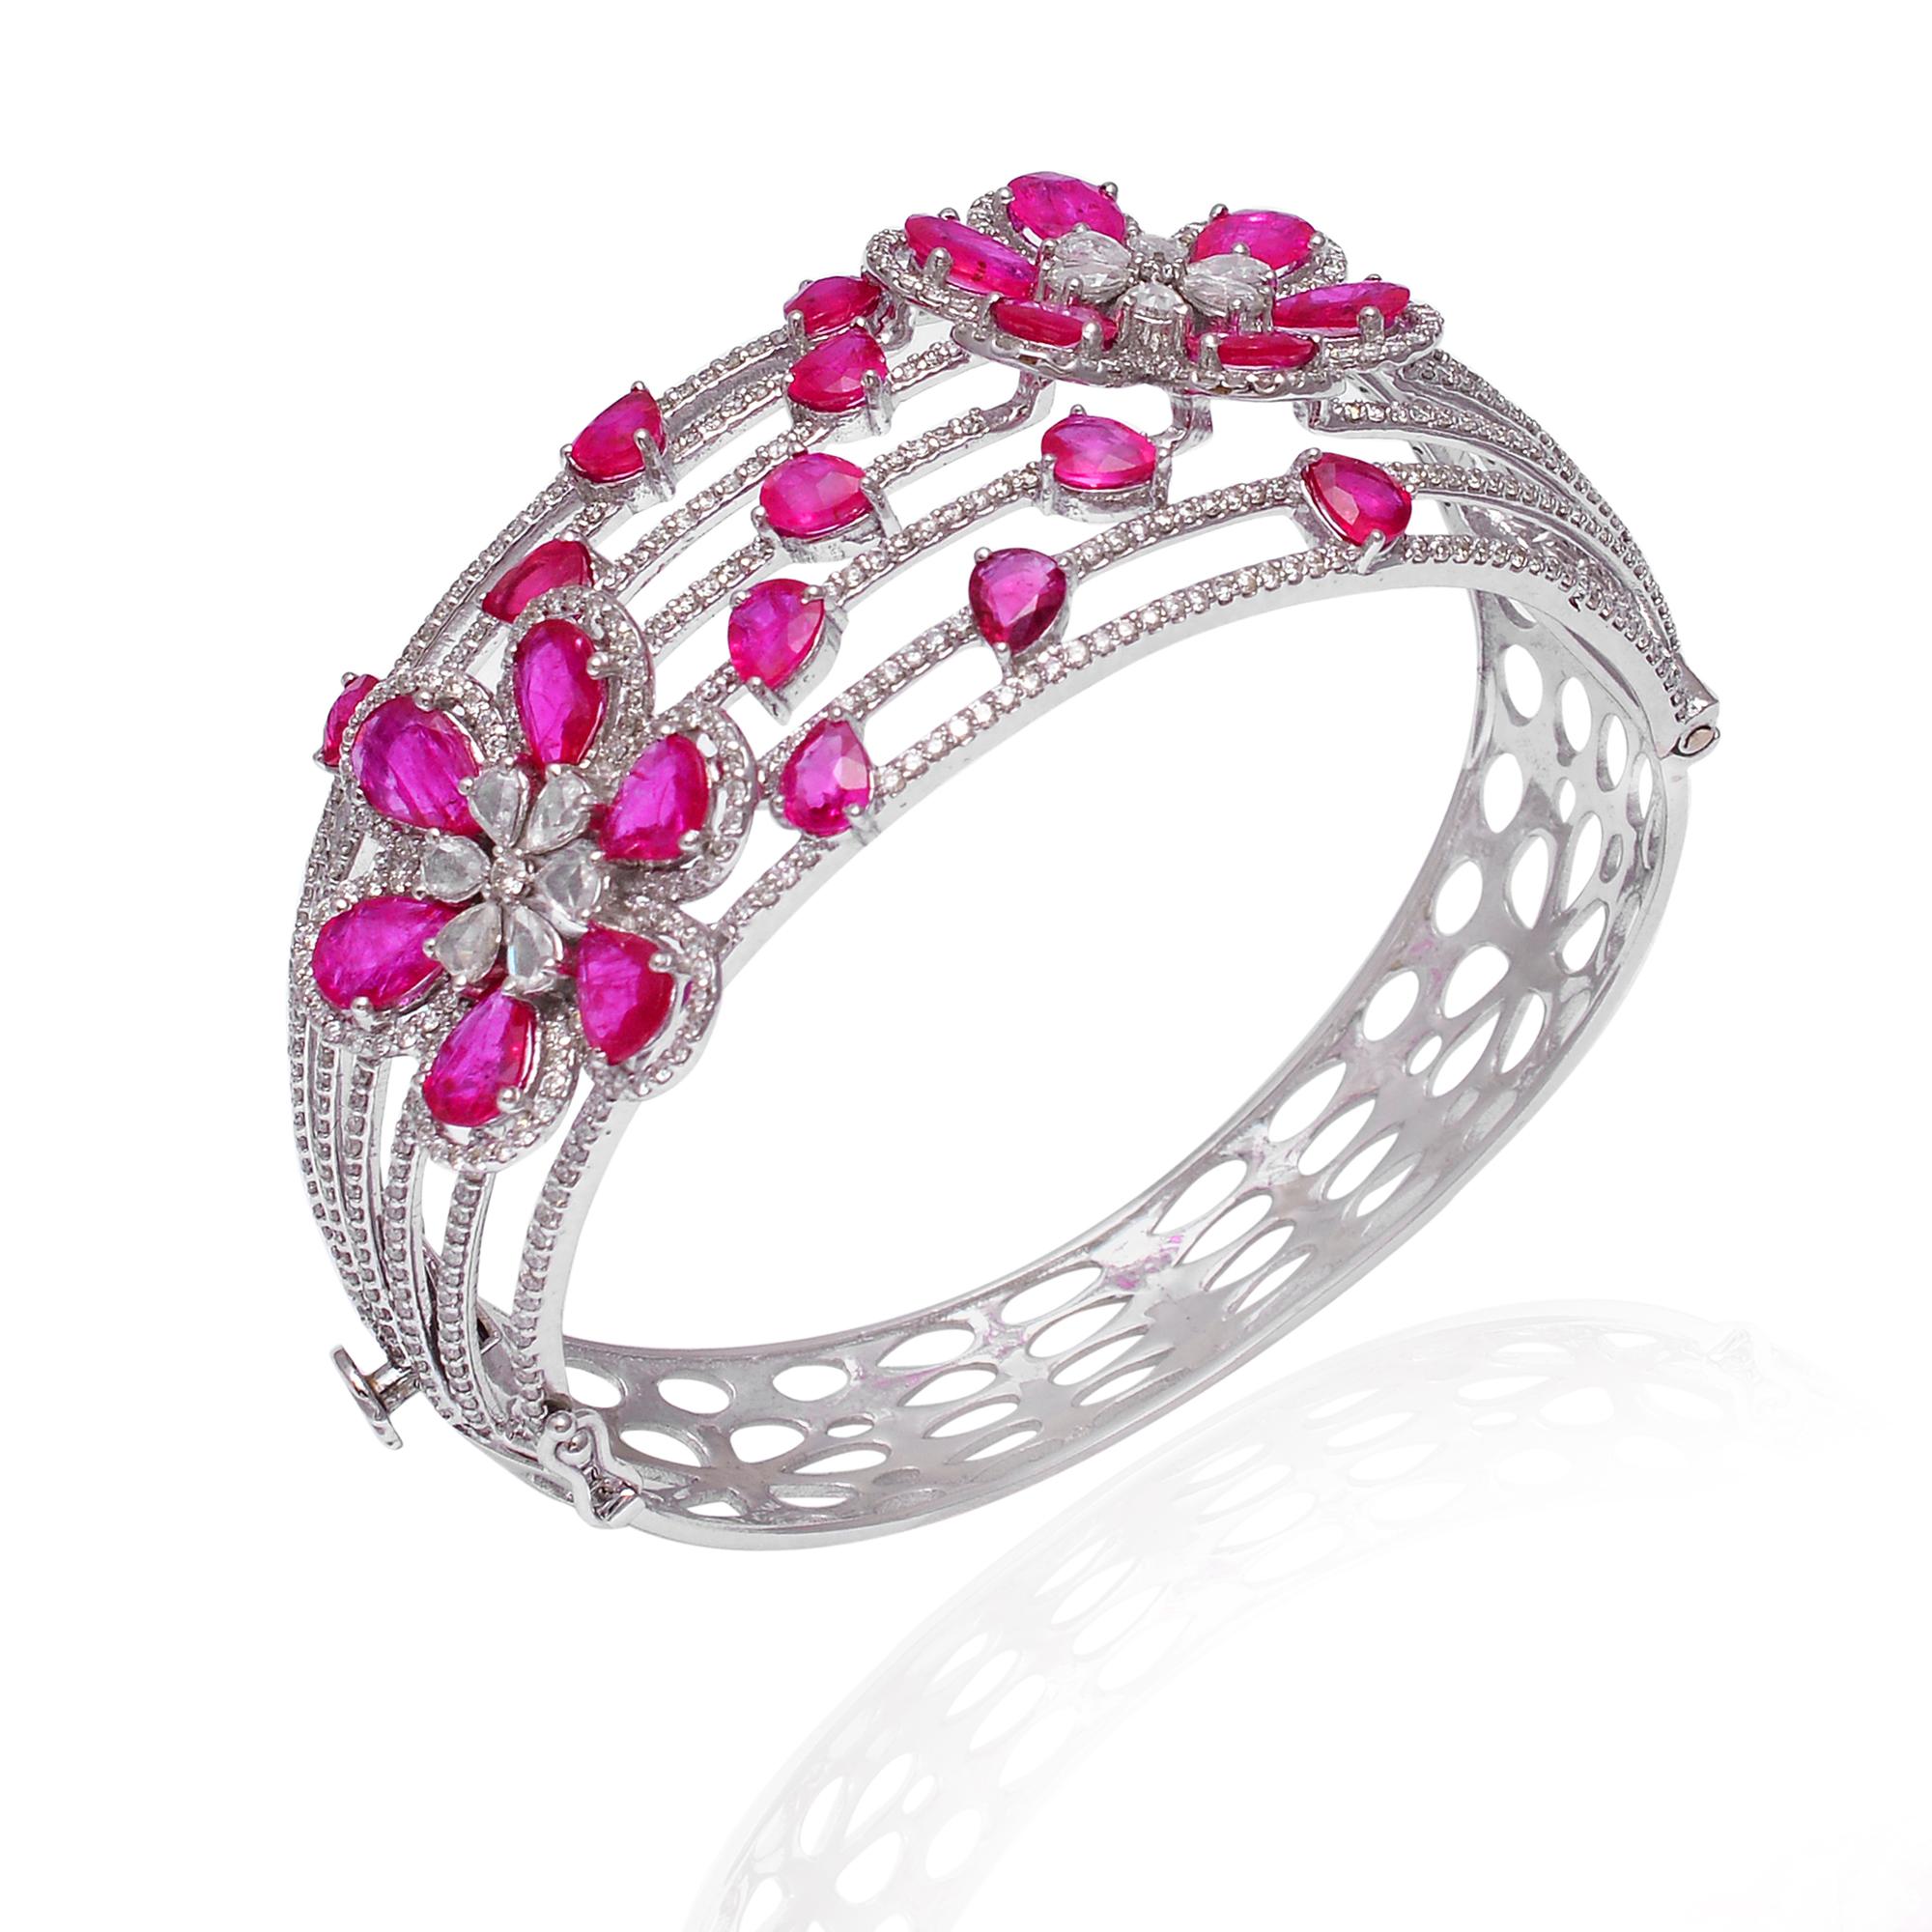 This is a beautiful bangle made up of 18K Gold, high-quality diamonds, and rubies. This is perfect for any special occasion like a wedding, engagement, festival, etc.

Specifications :-

Gross Weight: 38.500 grams
Gold Weight : 35.666 grams
Diamond